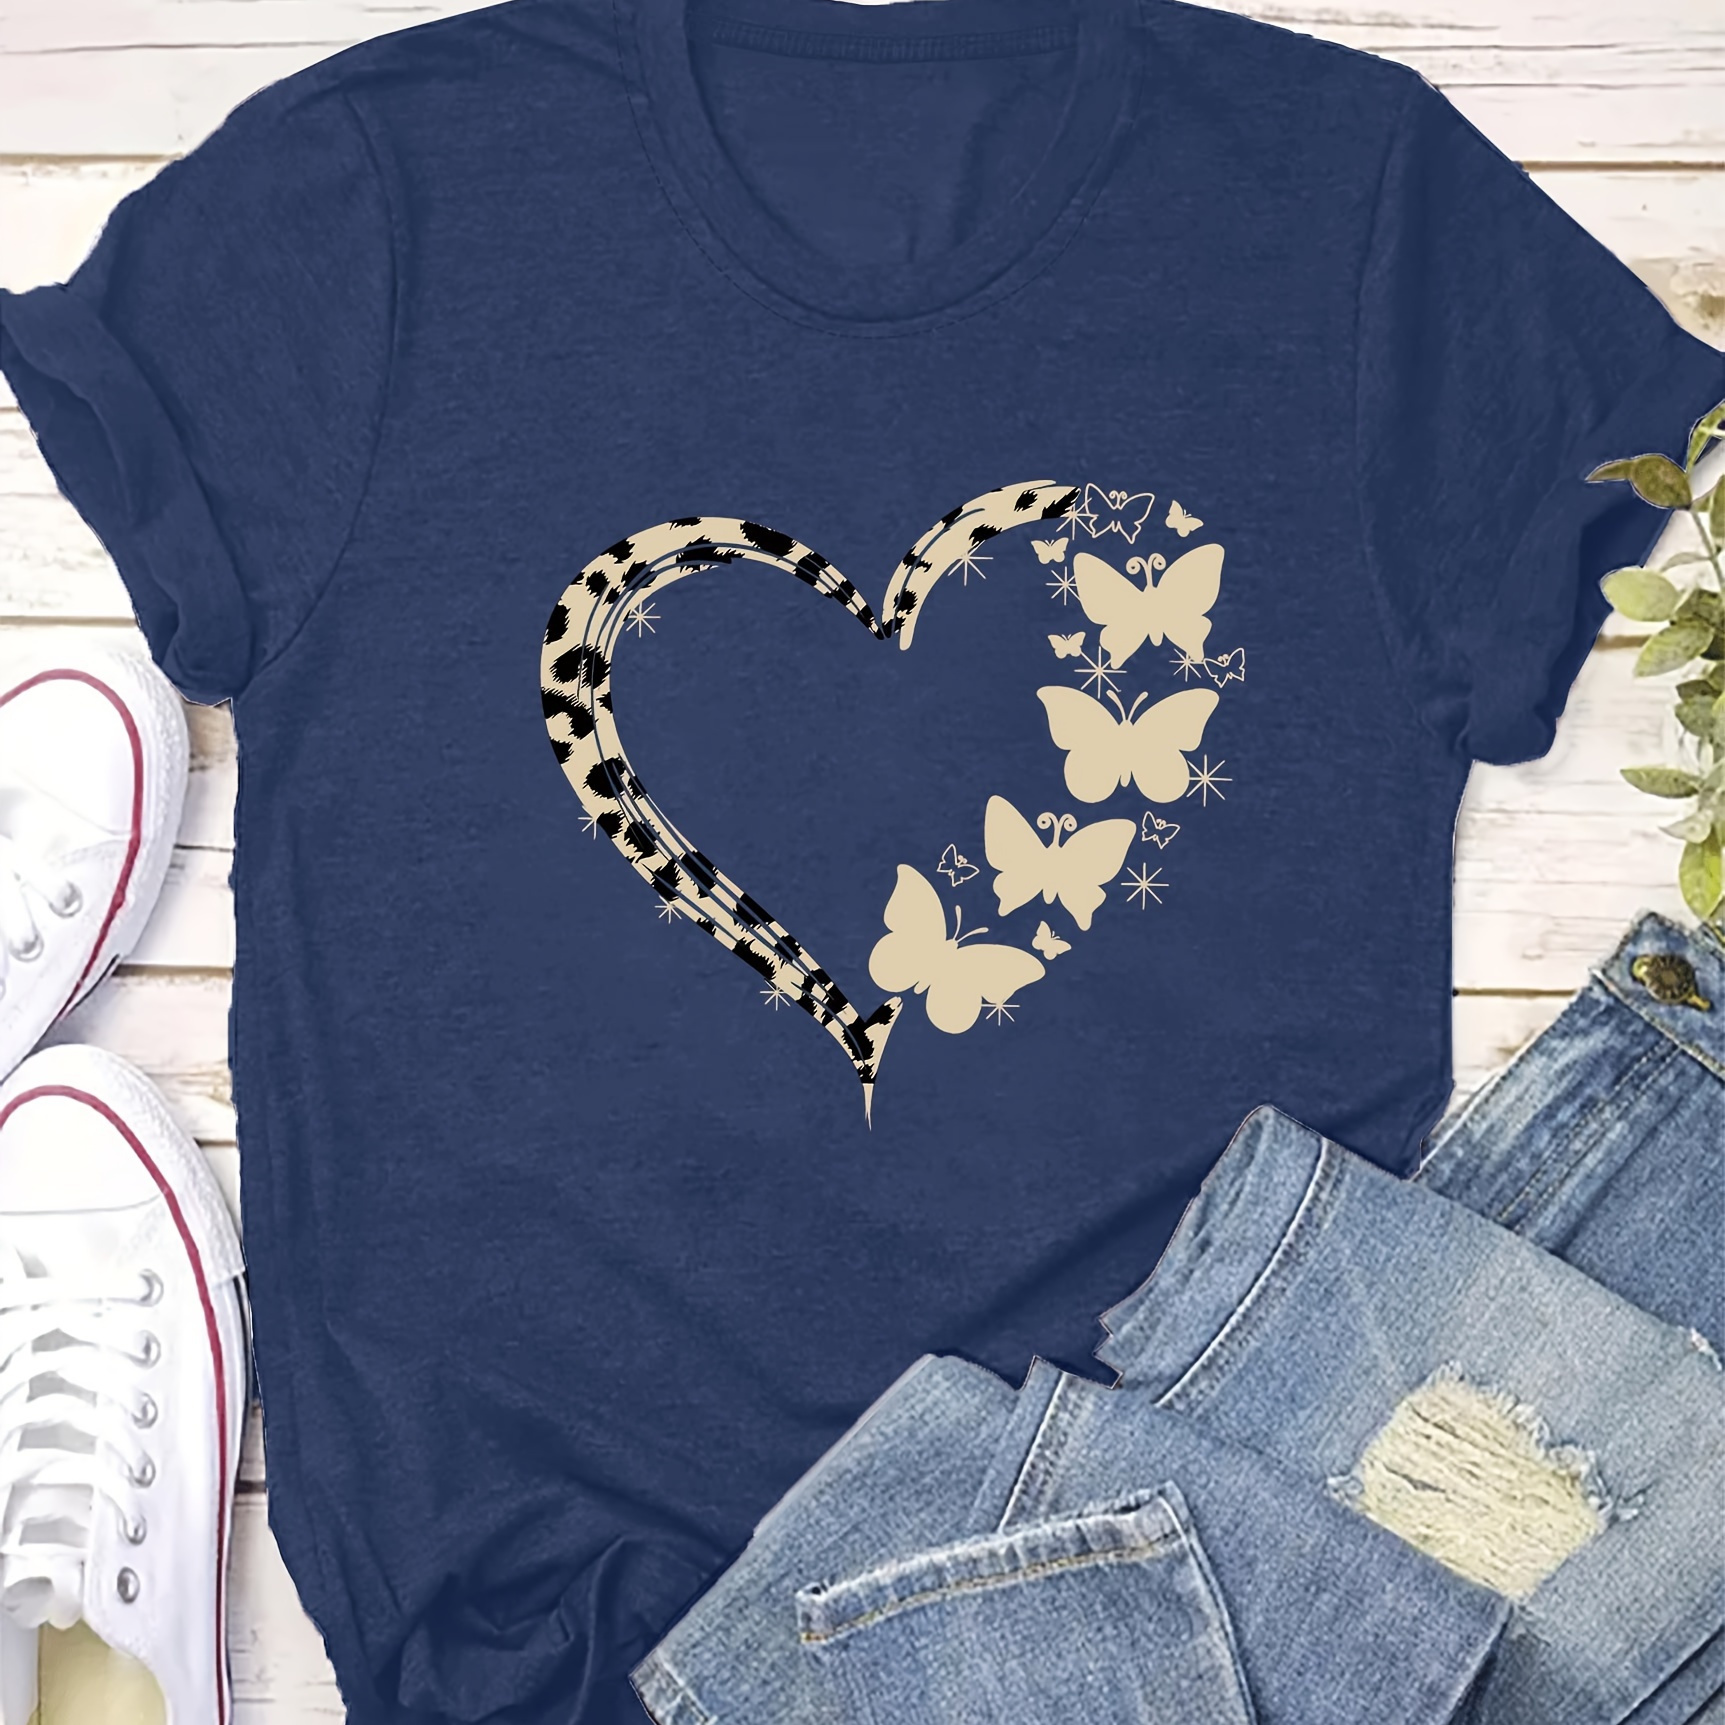 

Heart & Butterfly Print Crew Neck T-shirt, Casual Short Sleeve T-shirt For Spring & Summer, Women's Clothing